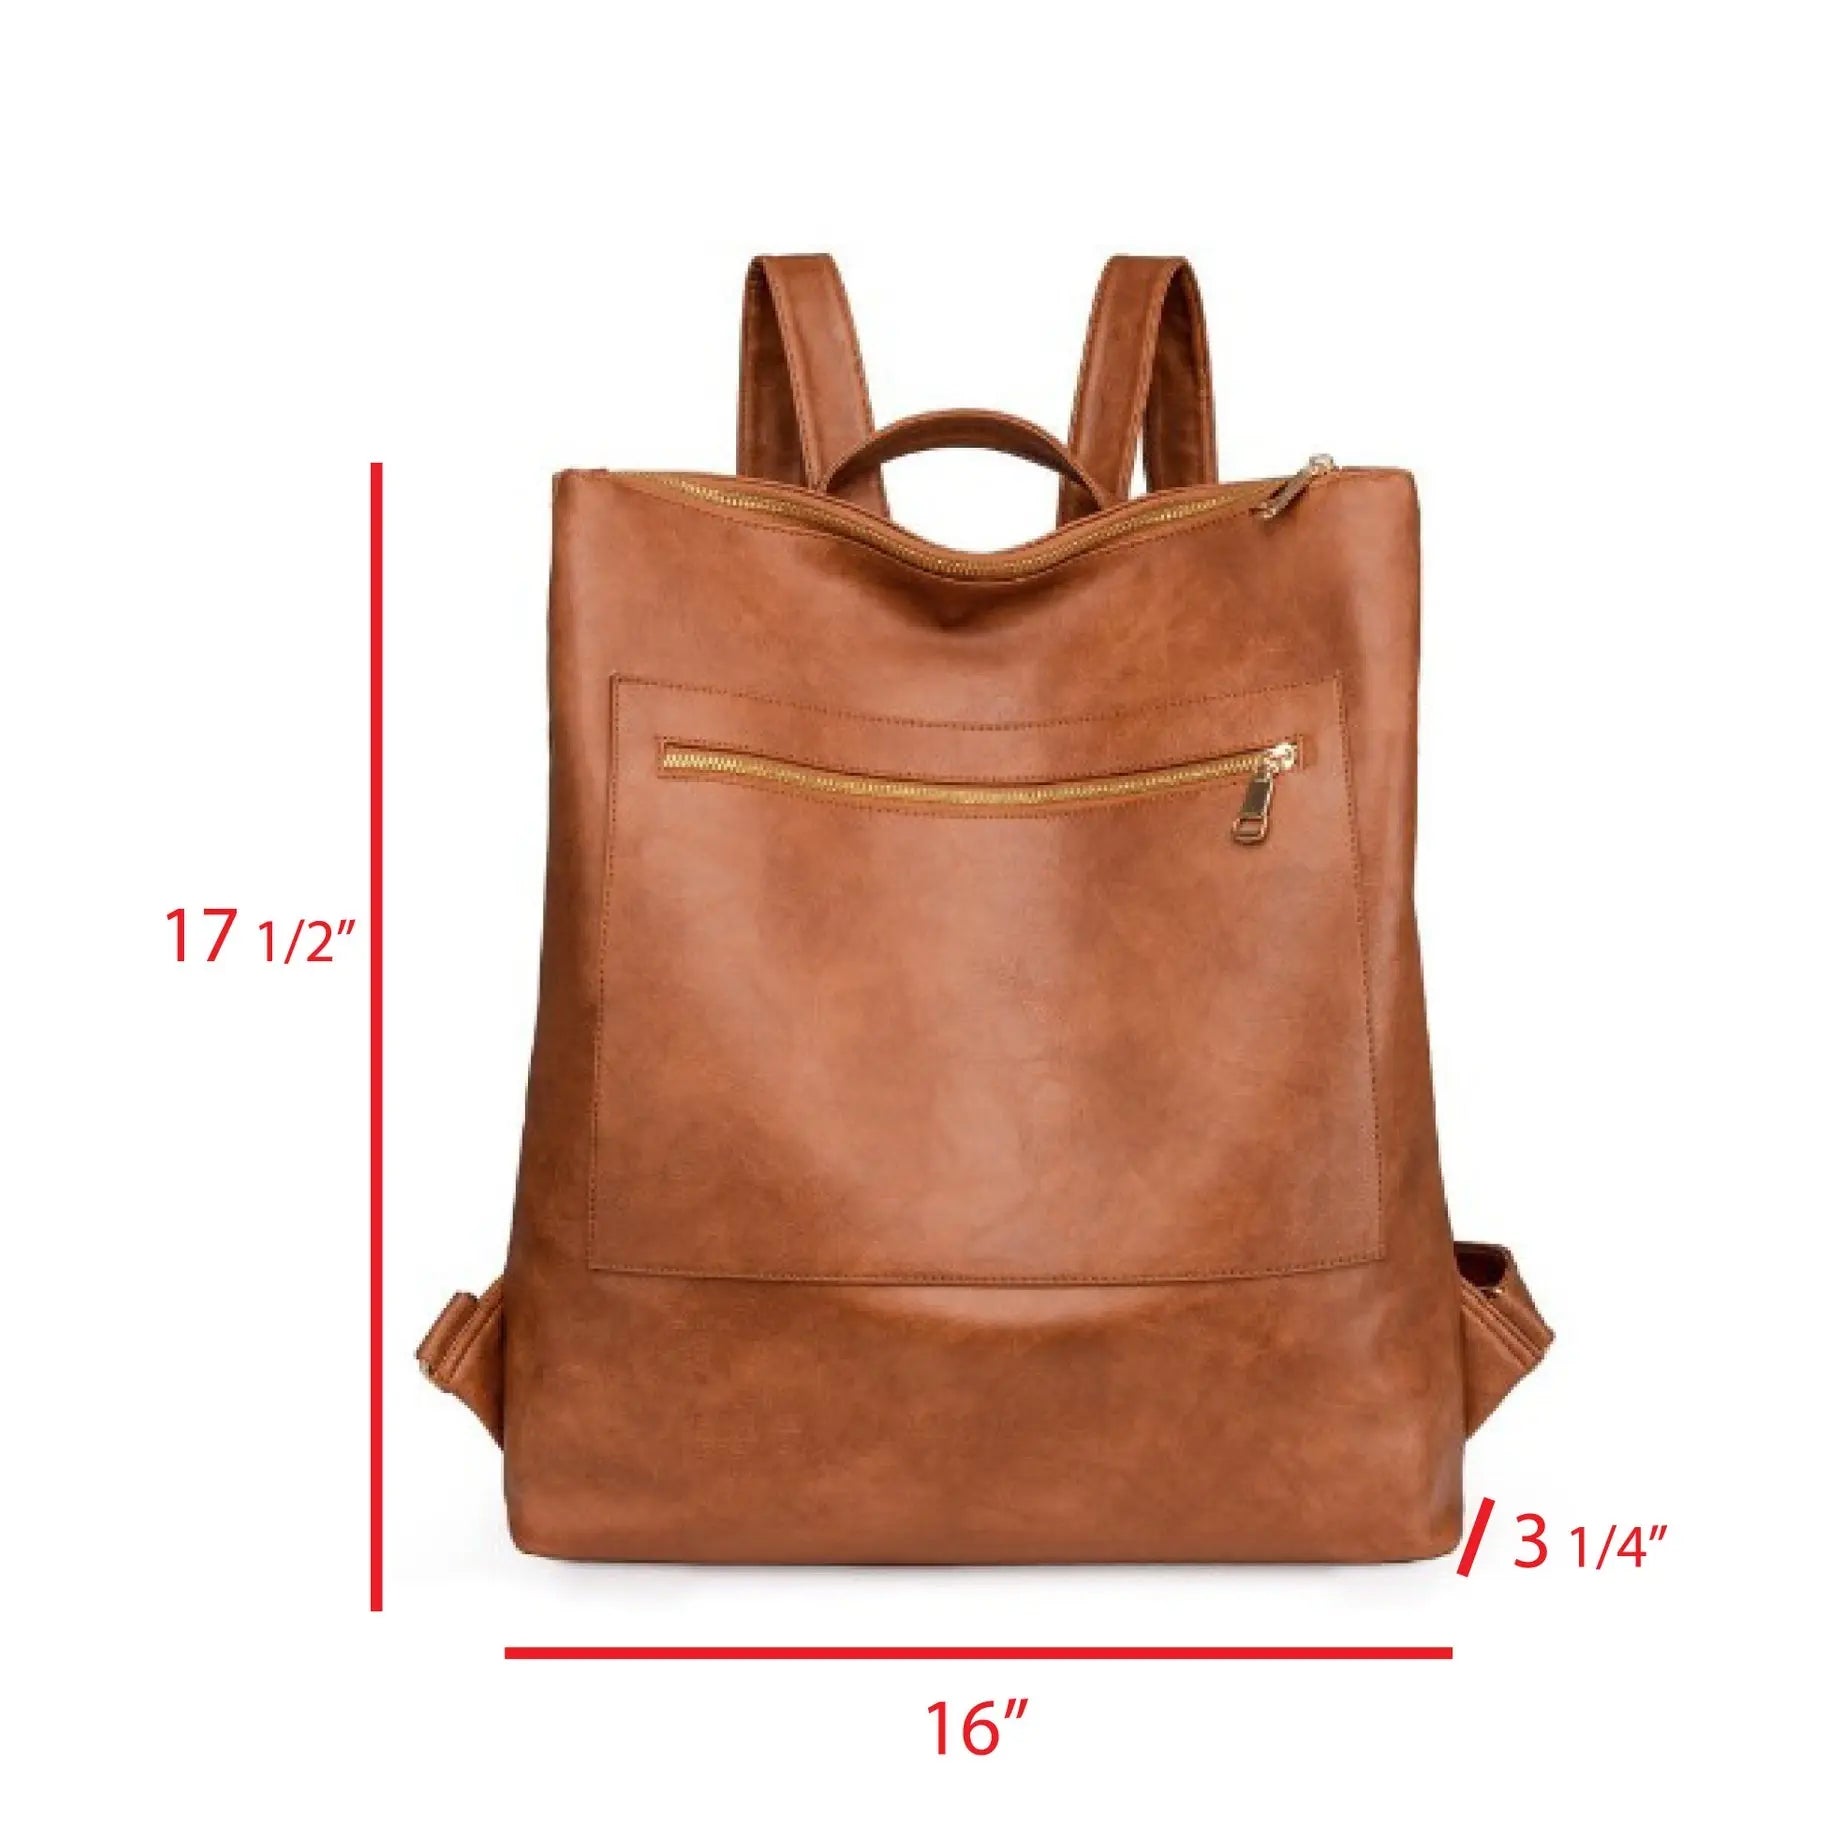 The Tiny Details Brown Leather Backpack